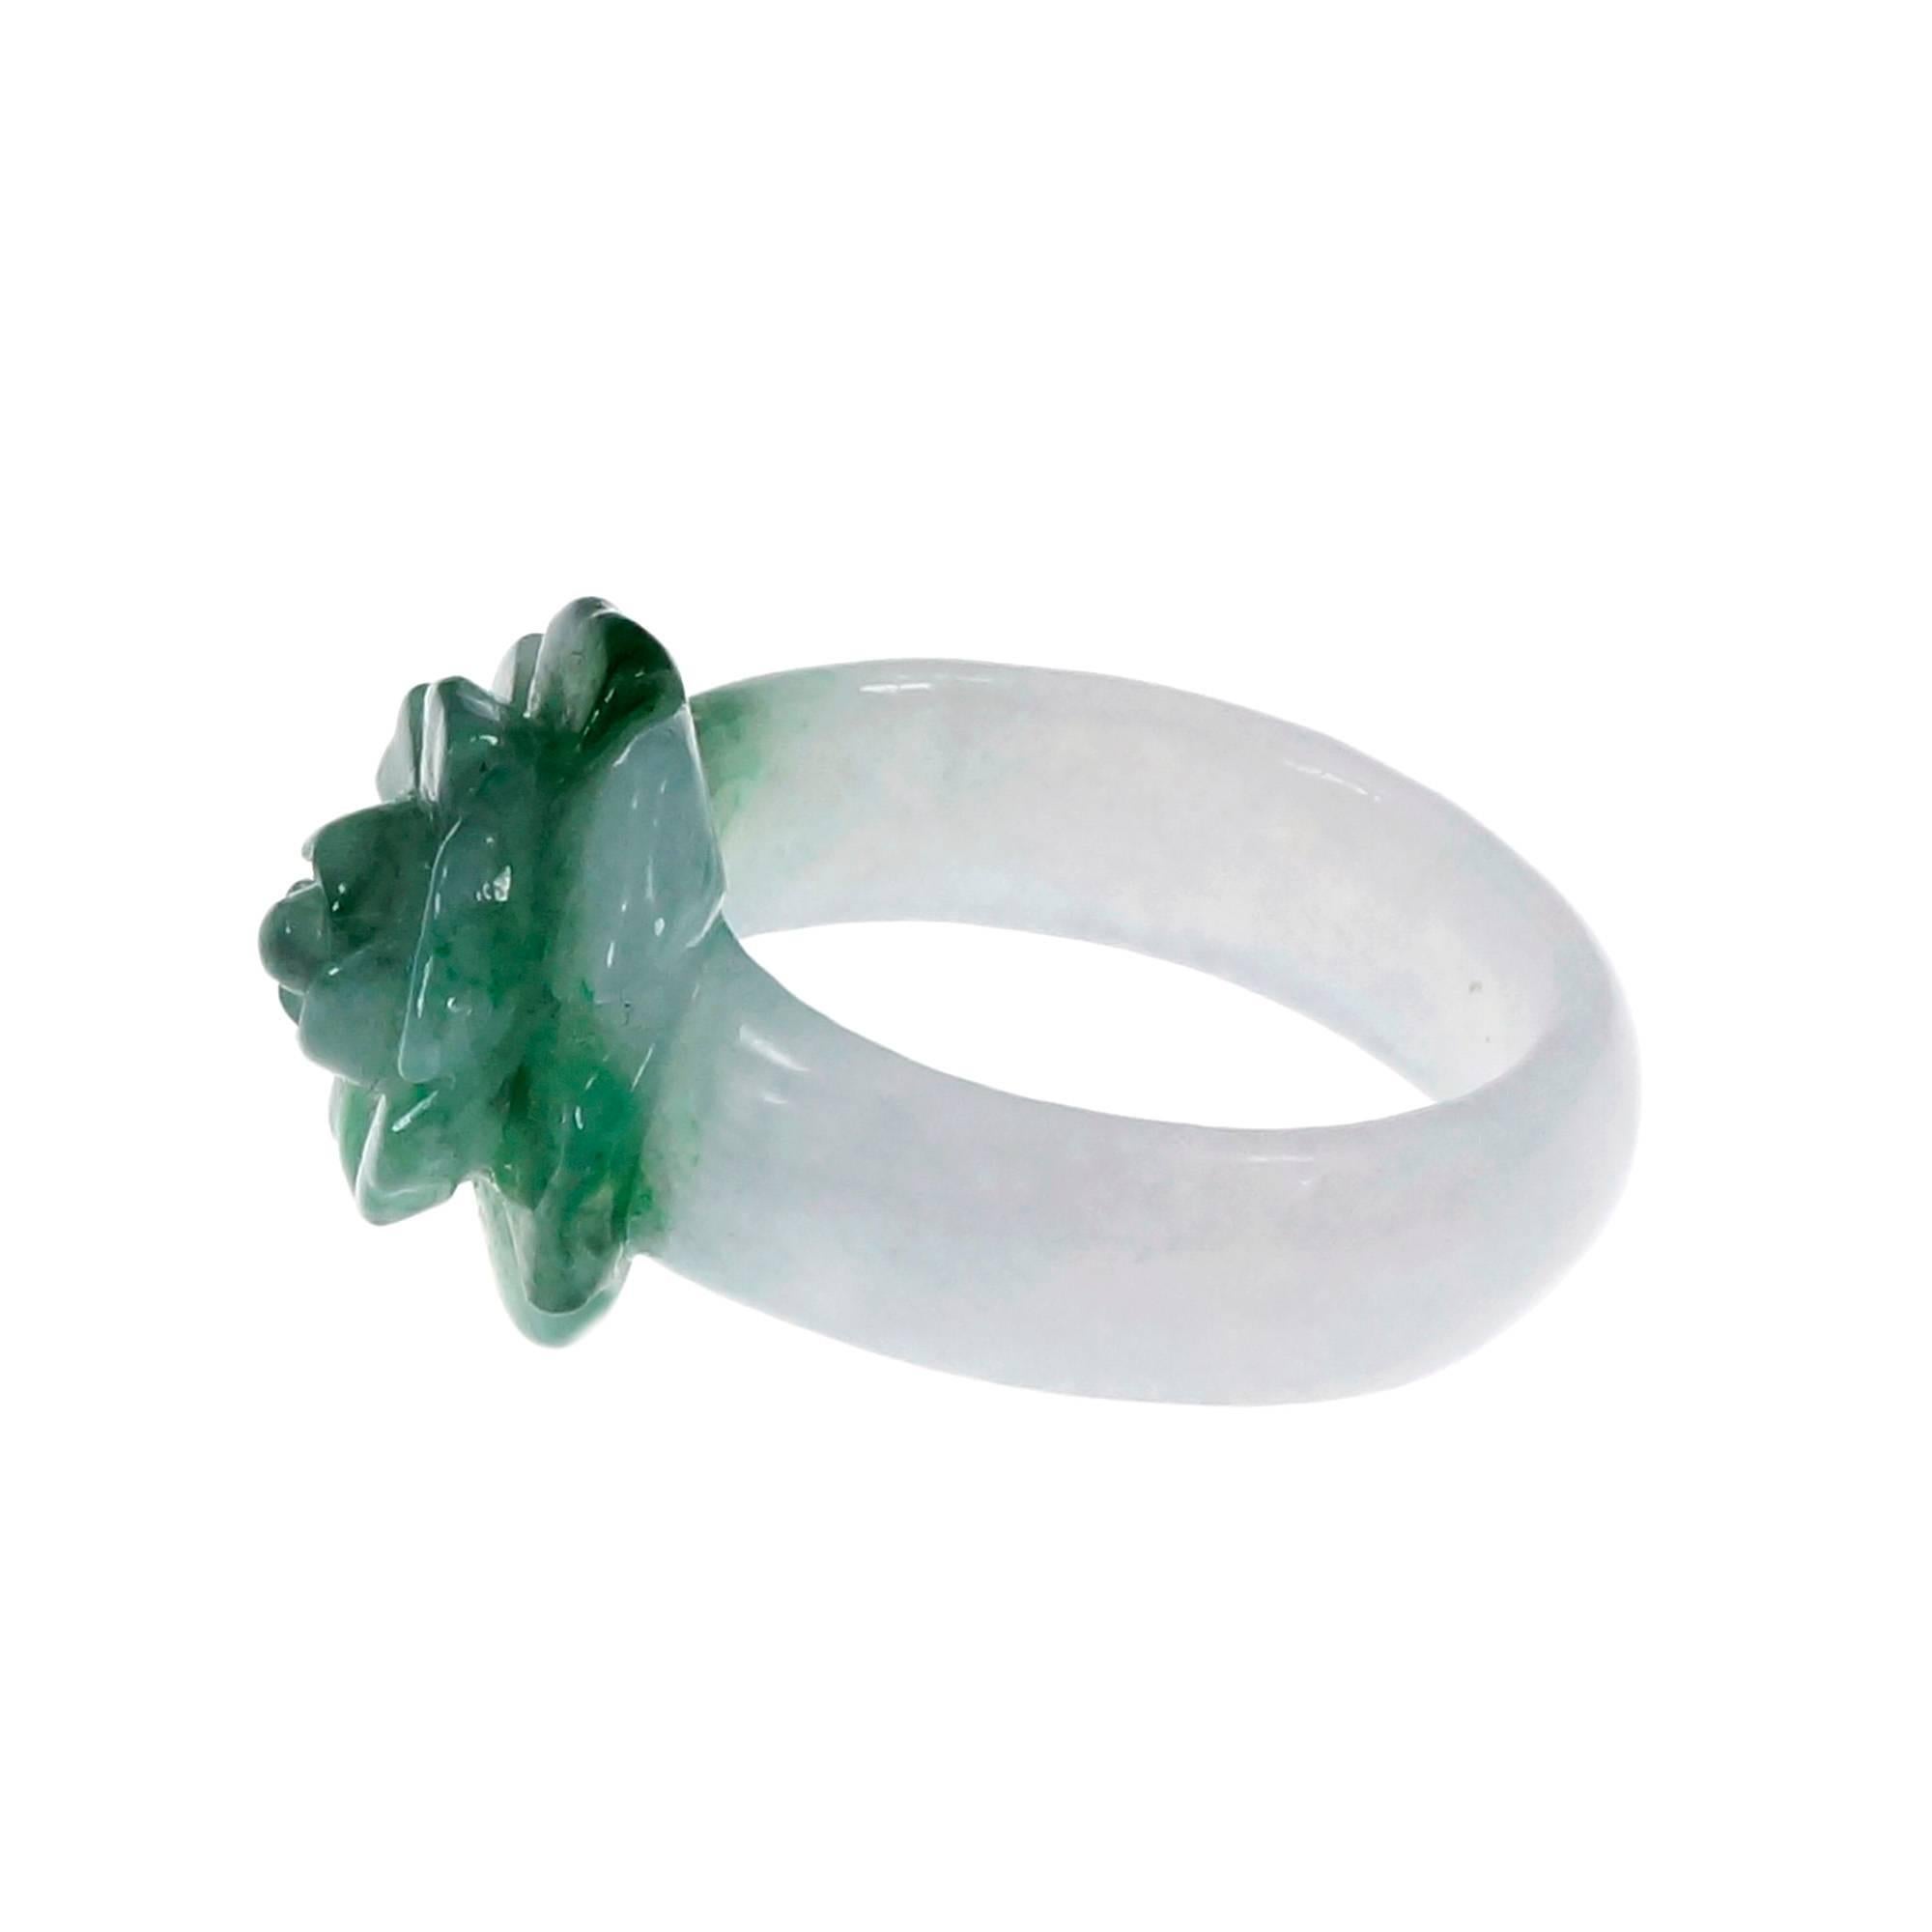 Natural Jadeite Jade blended green and white color flower cocktail ring. Translucent GIA certified natural Jadeite Jade. this ring is not sizable

1 carved variegated green white Jadeite Jade, approx. total weight 27.34cts, GIA certificate